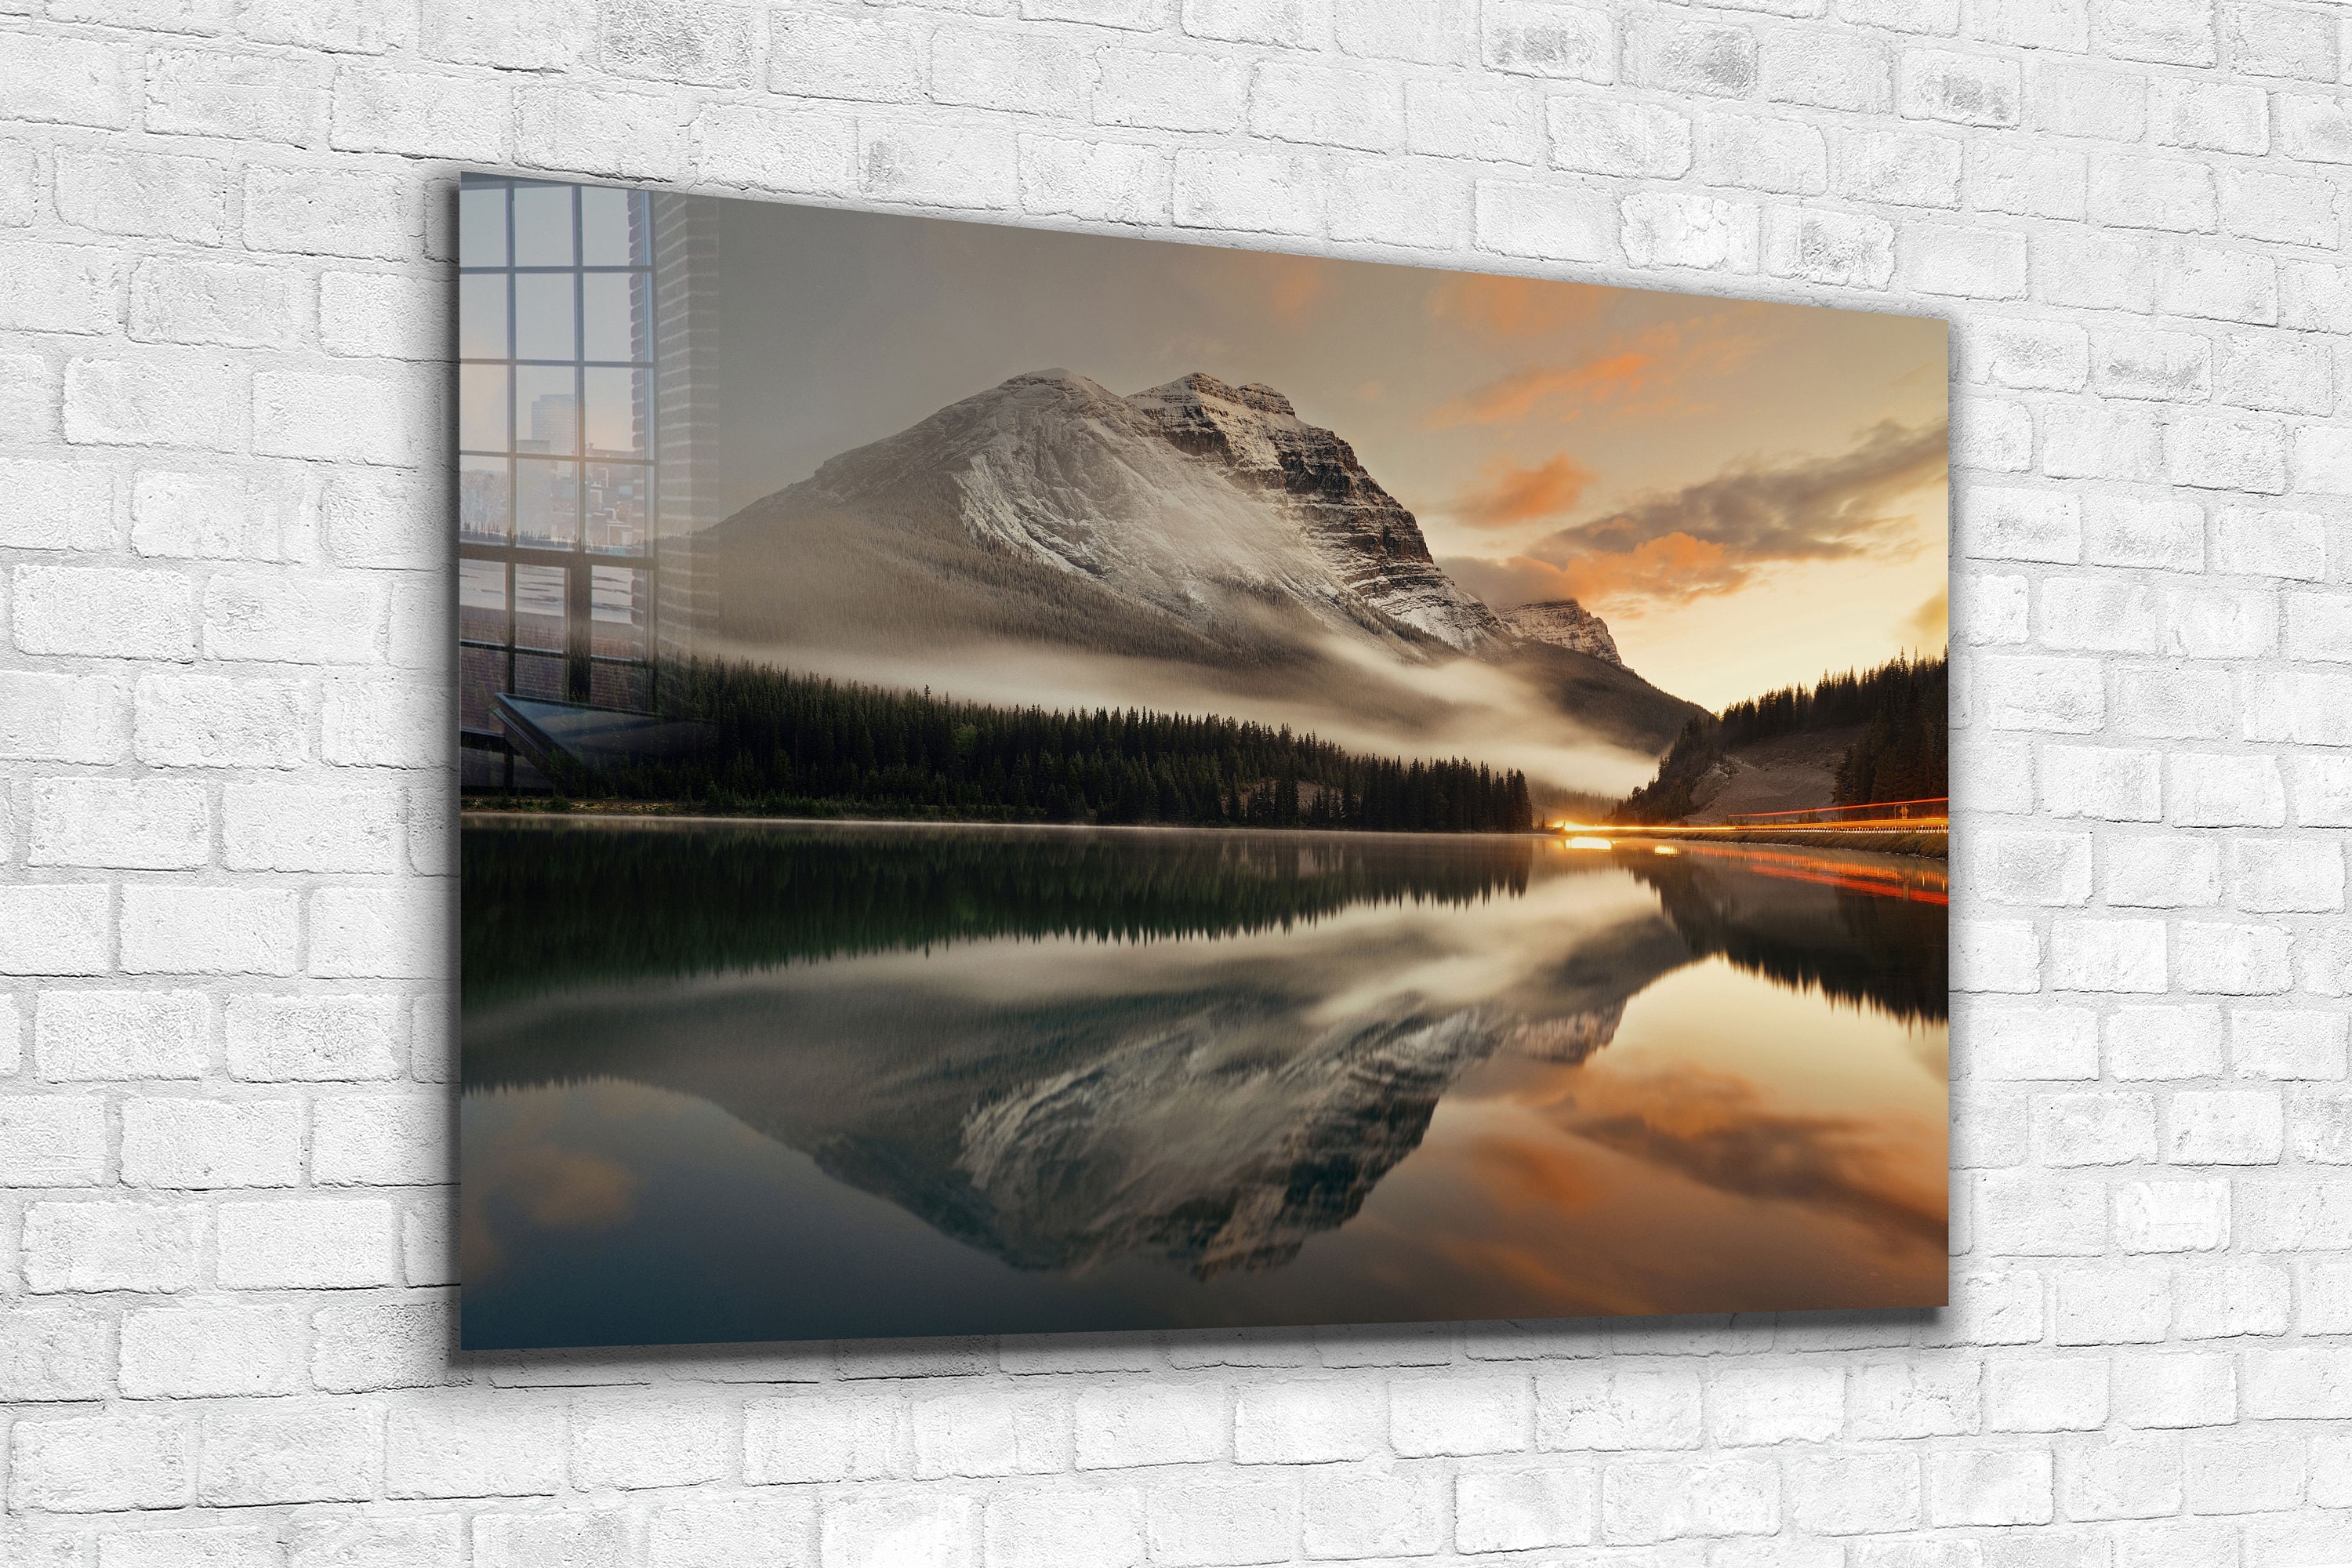 Glass Print Wall Art 112x45 cm Image on Glass Decorative Wall Picture 96464167 